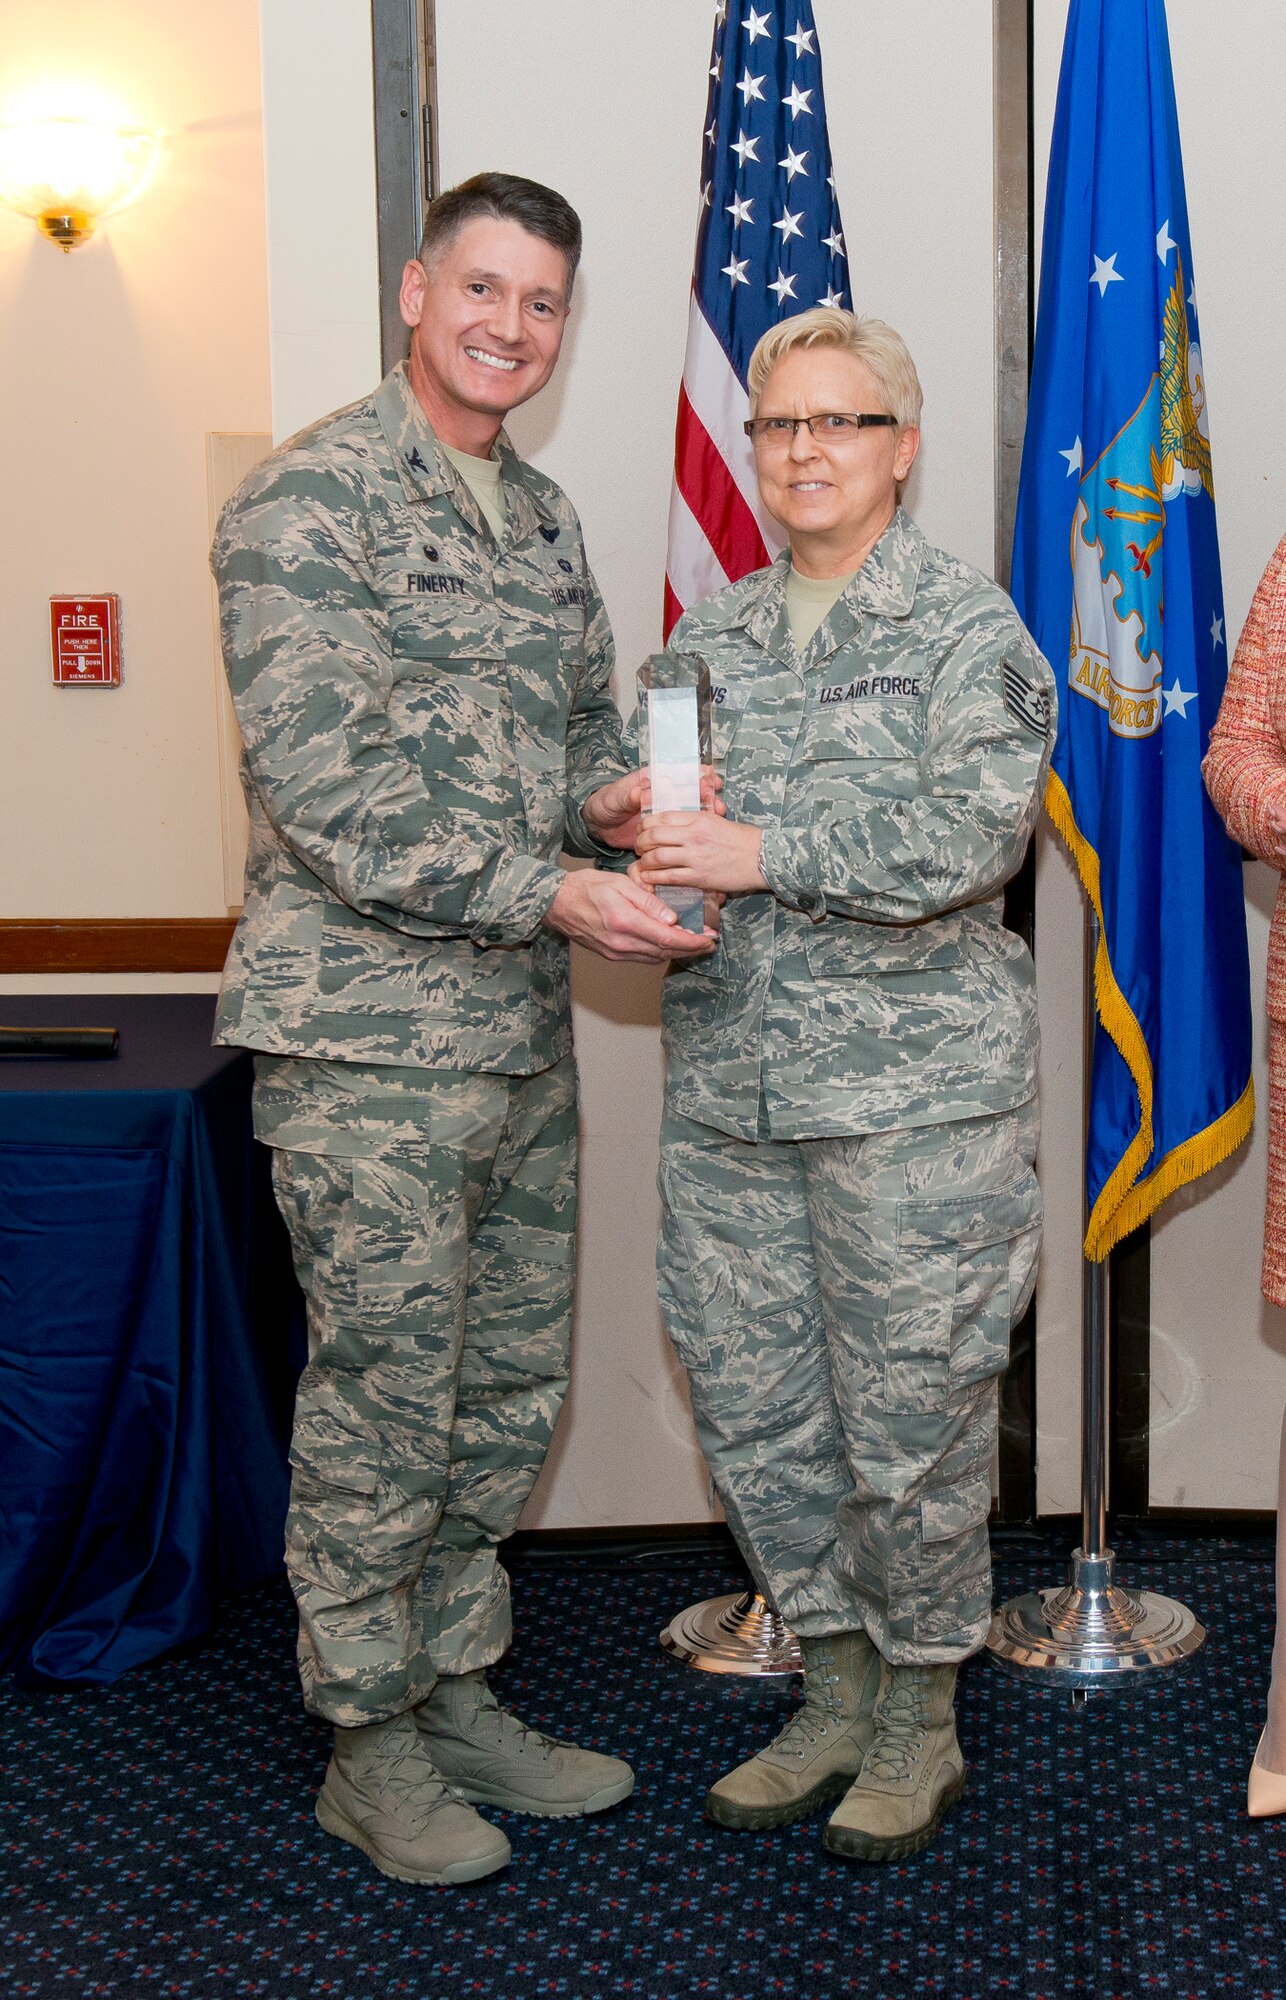 Col. Christopher E. Finerty, the vice commander of the Air National Guard Readiness Center Joint Base Andrews, Md., presents the Non-Commissioned Officer of the Year award to Technical Sgt. Vicki J Stearns during the 2015 ANGRC annual awards ceremony, April 18, 2016. The ceremony recognizes significant contributions in leadership, job performance in their primary duties, self-improvement, and base and community involvement. (Air National Guard photo by Master Sgt. Marvin R. Preston/Released)